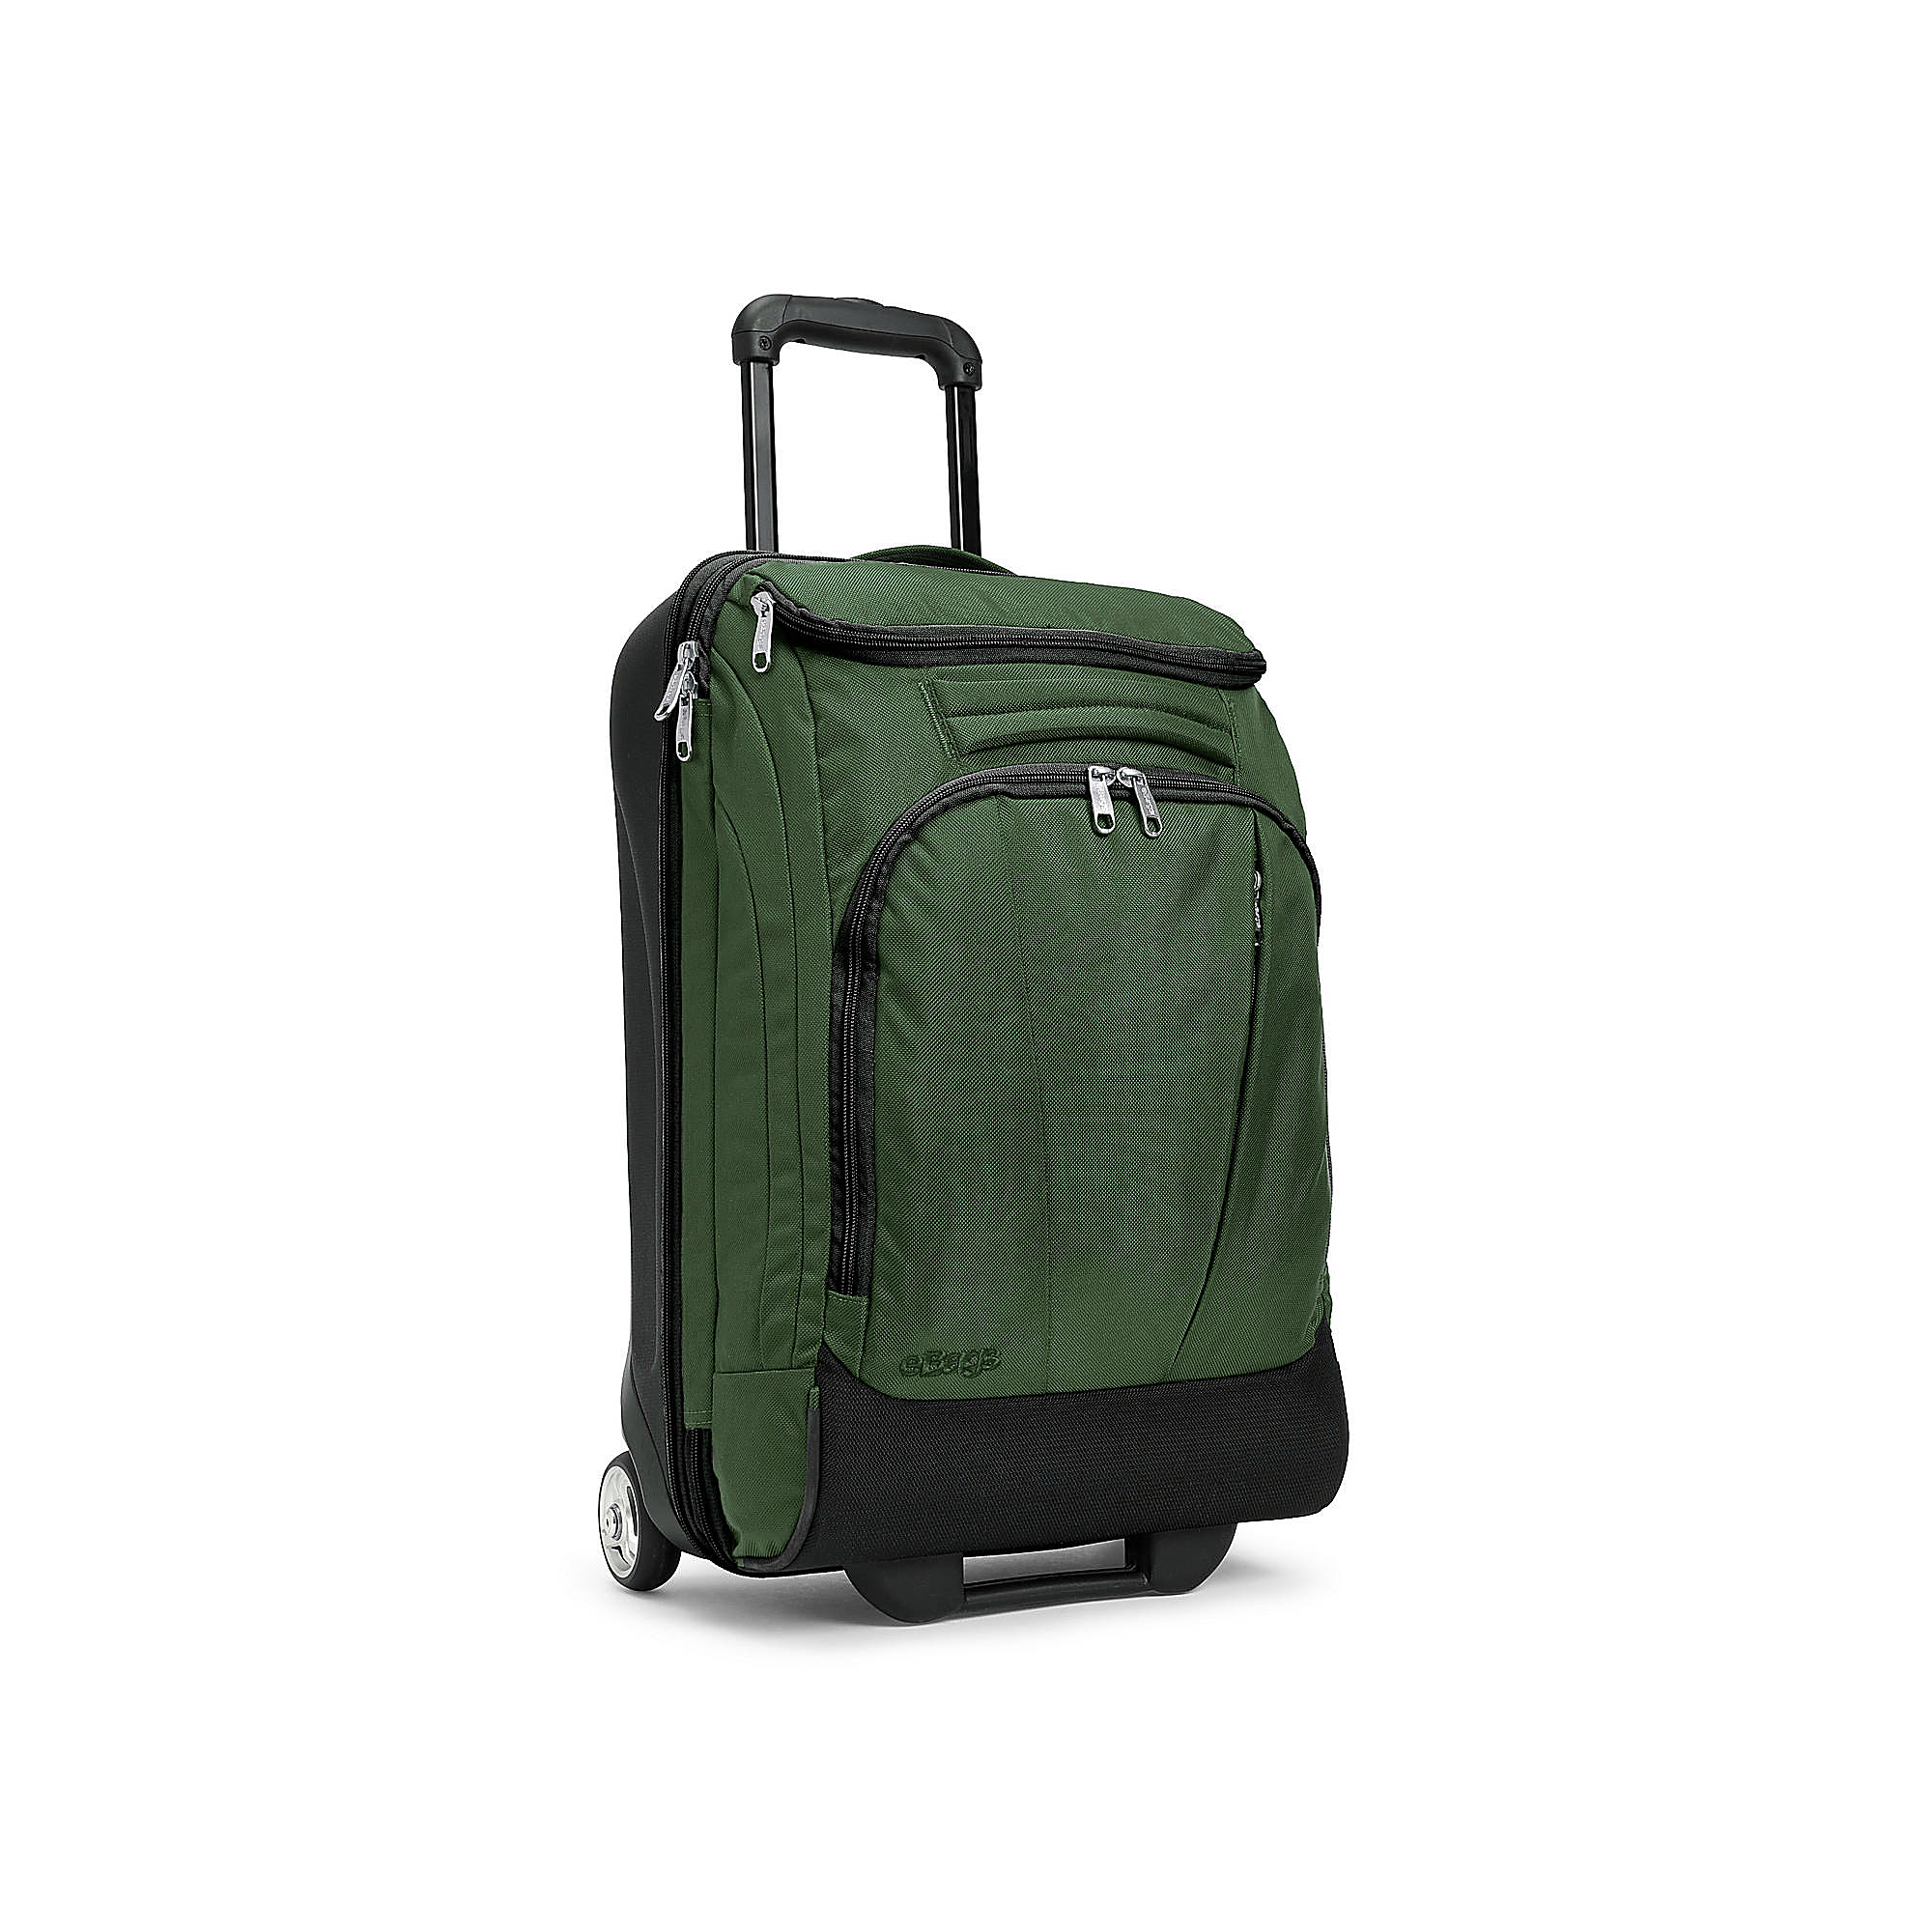 Mother Lode 21" Carry-On Rolling Duffel - apennysaver.com